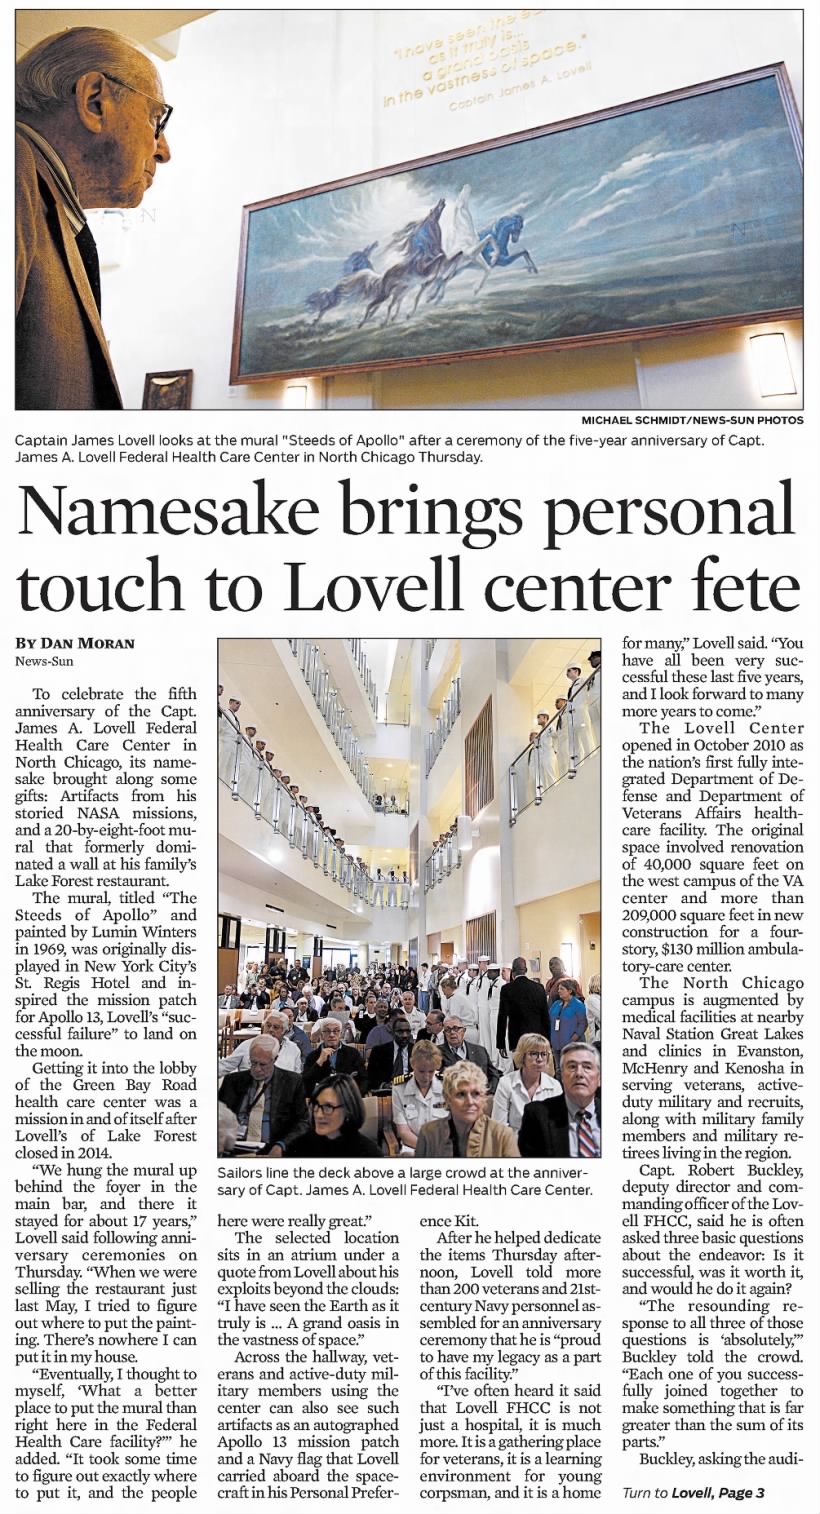 "Namesake Brings Personal Touch to Lovell Center Fete", page 1-1